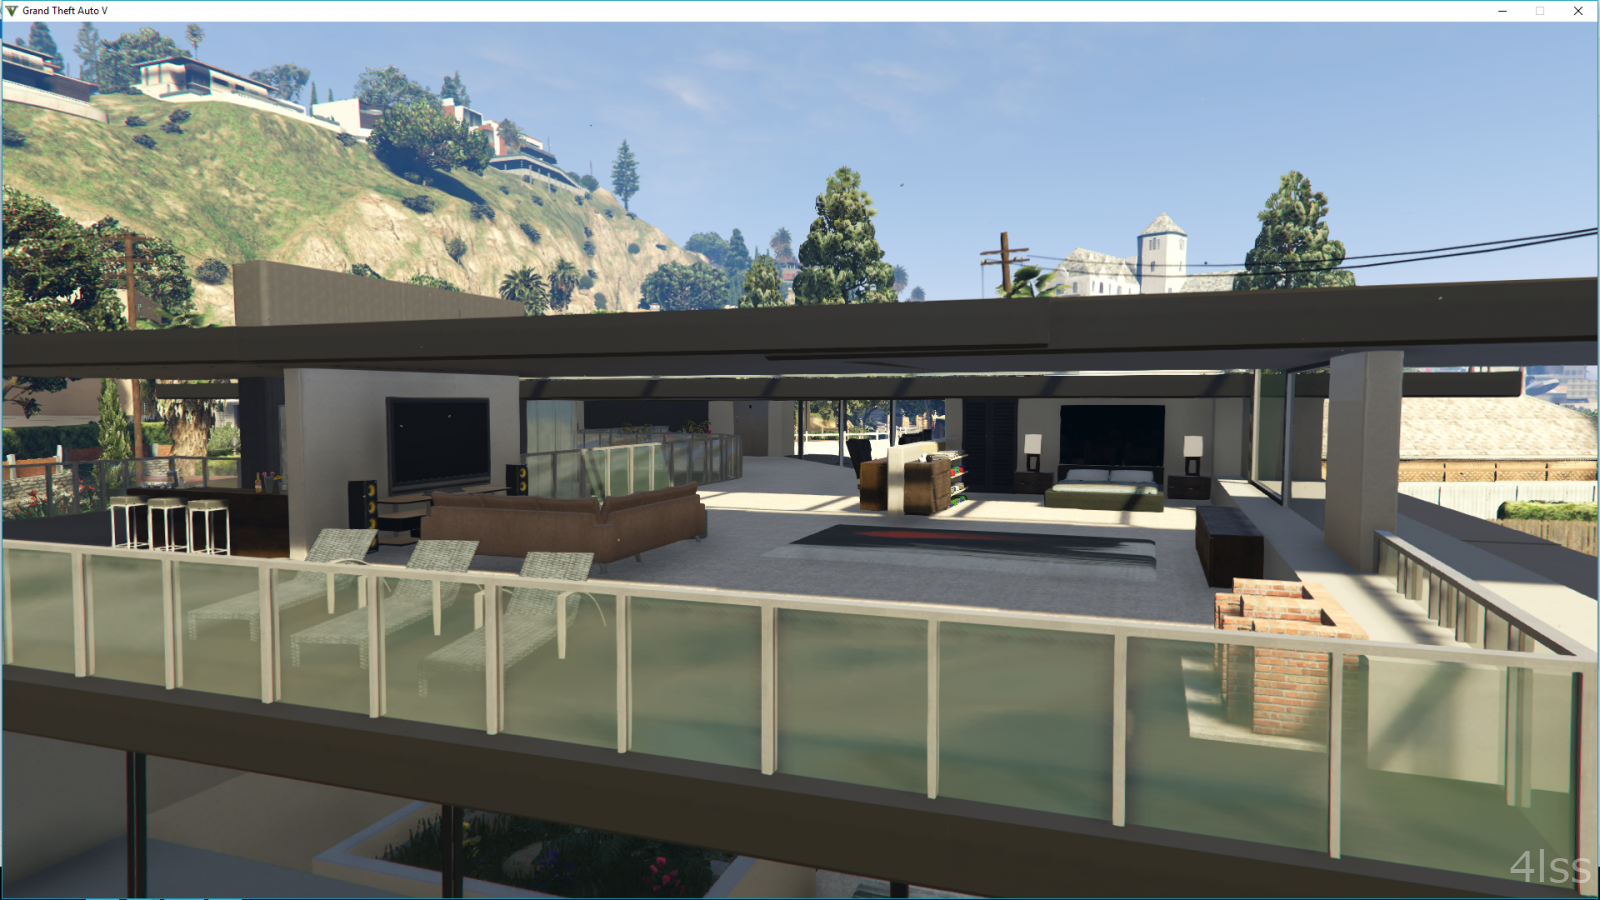 Can we buy a house in gta 5 фото 88